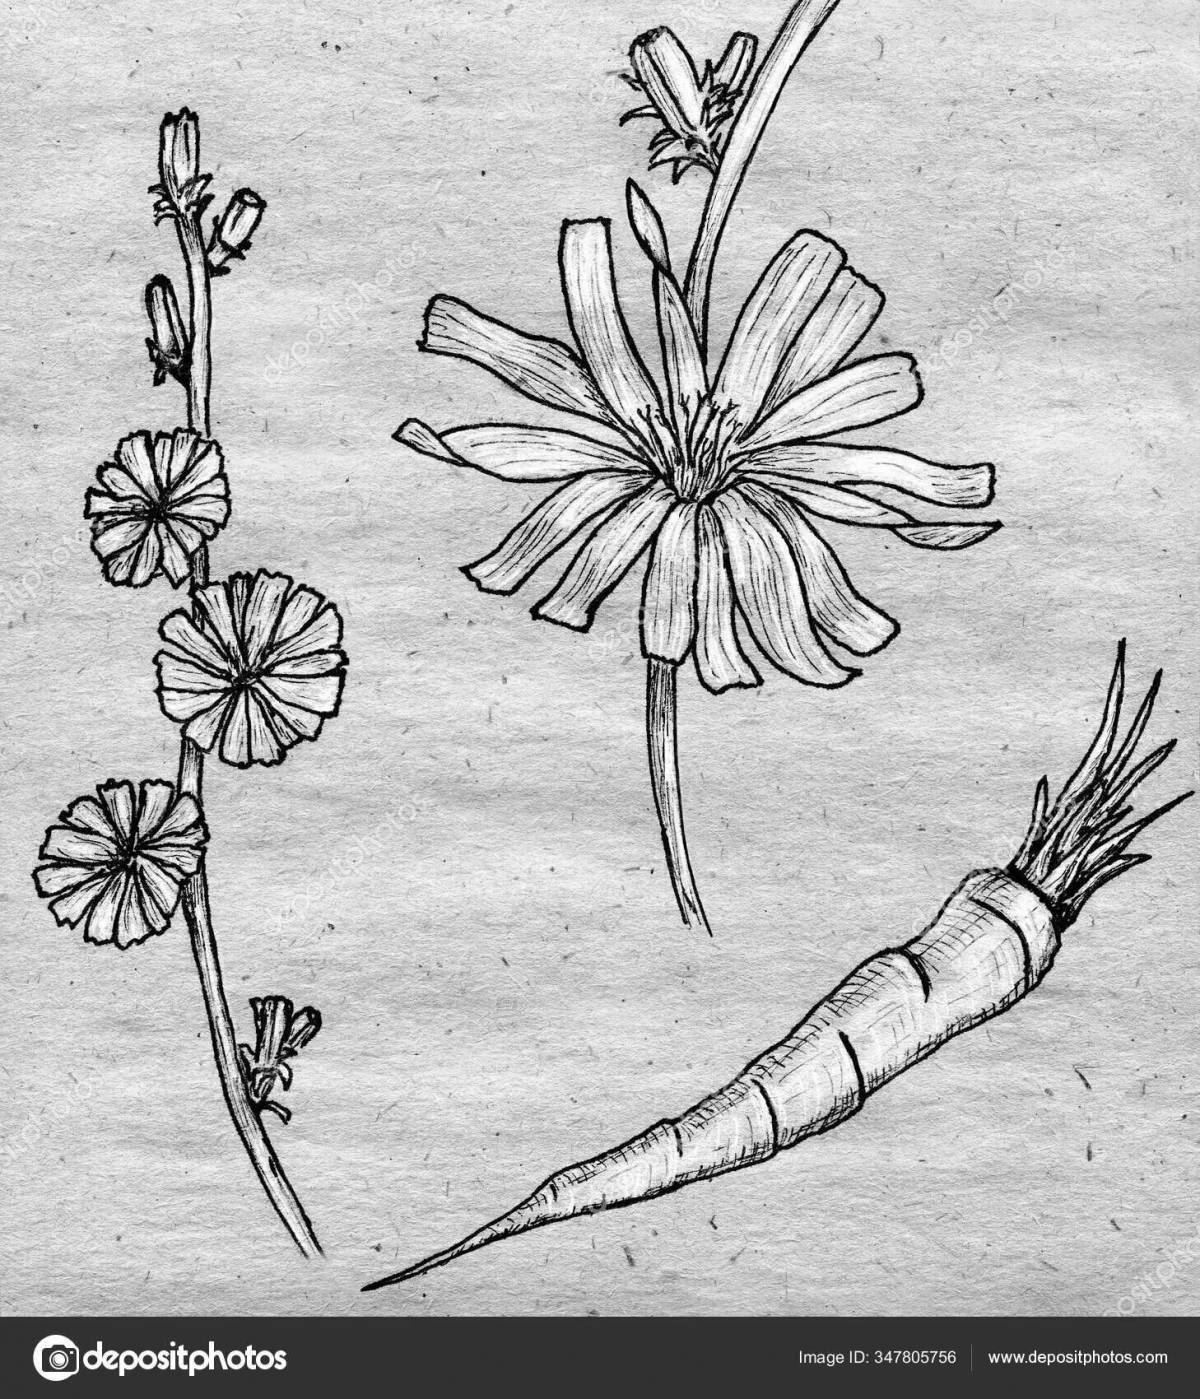 Delightful chicory coloring page